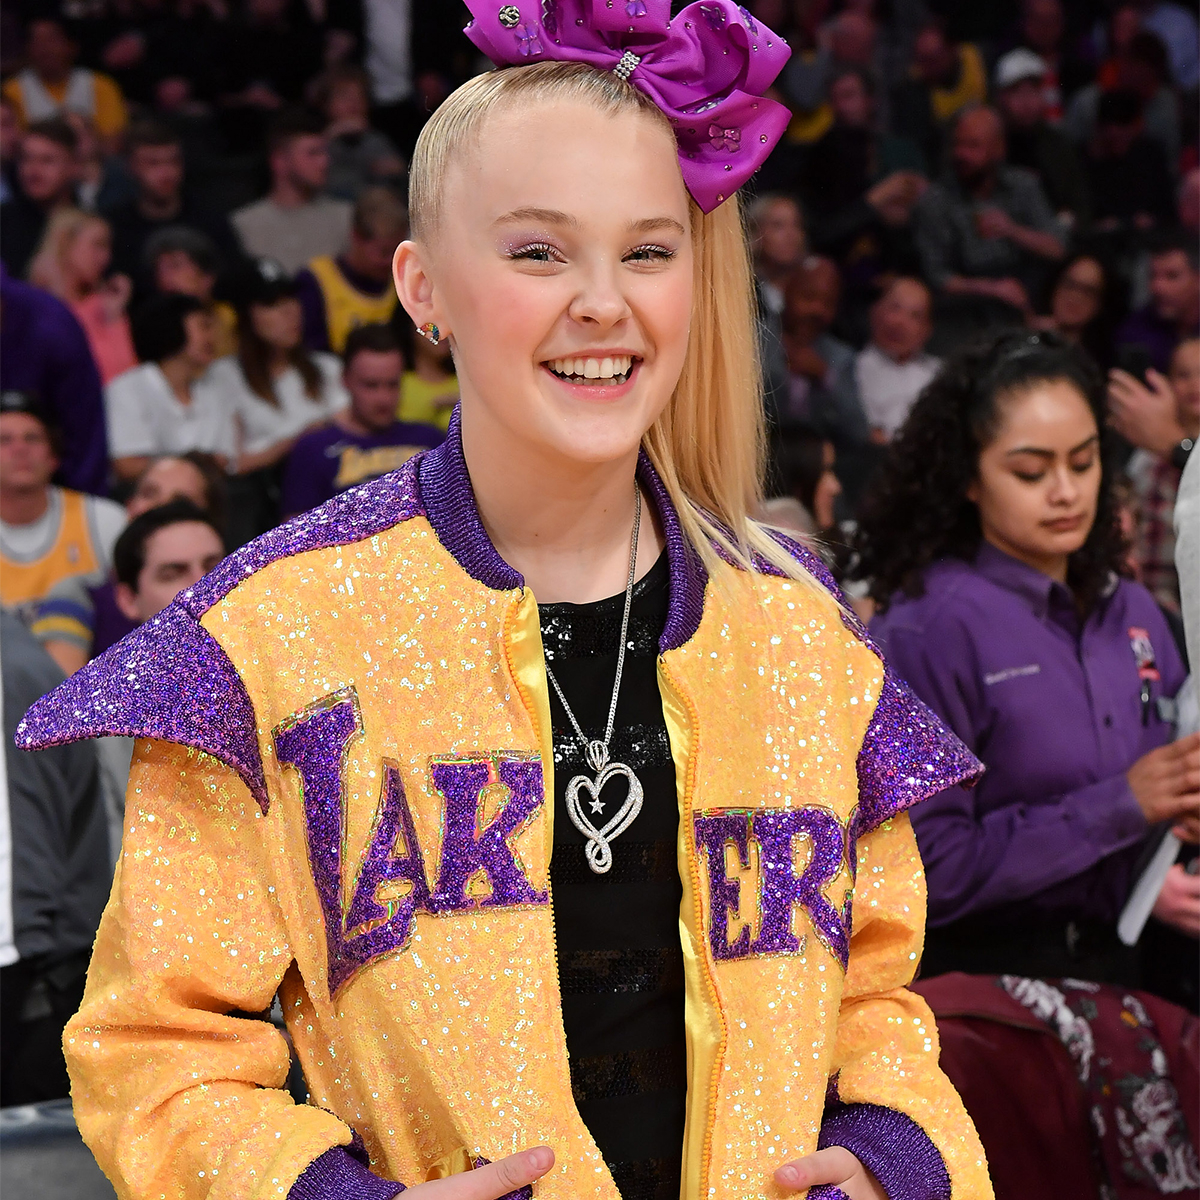 Jojo Siwa says he is “happy” in a candid video about coming out